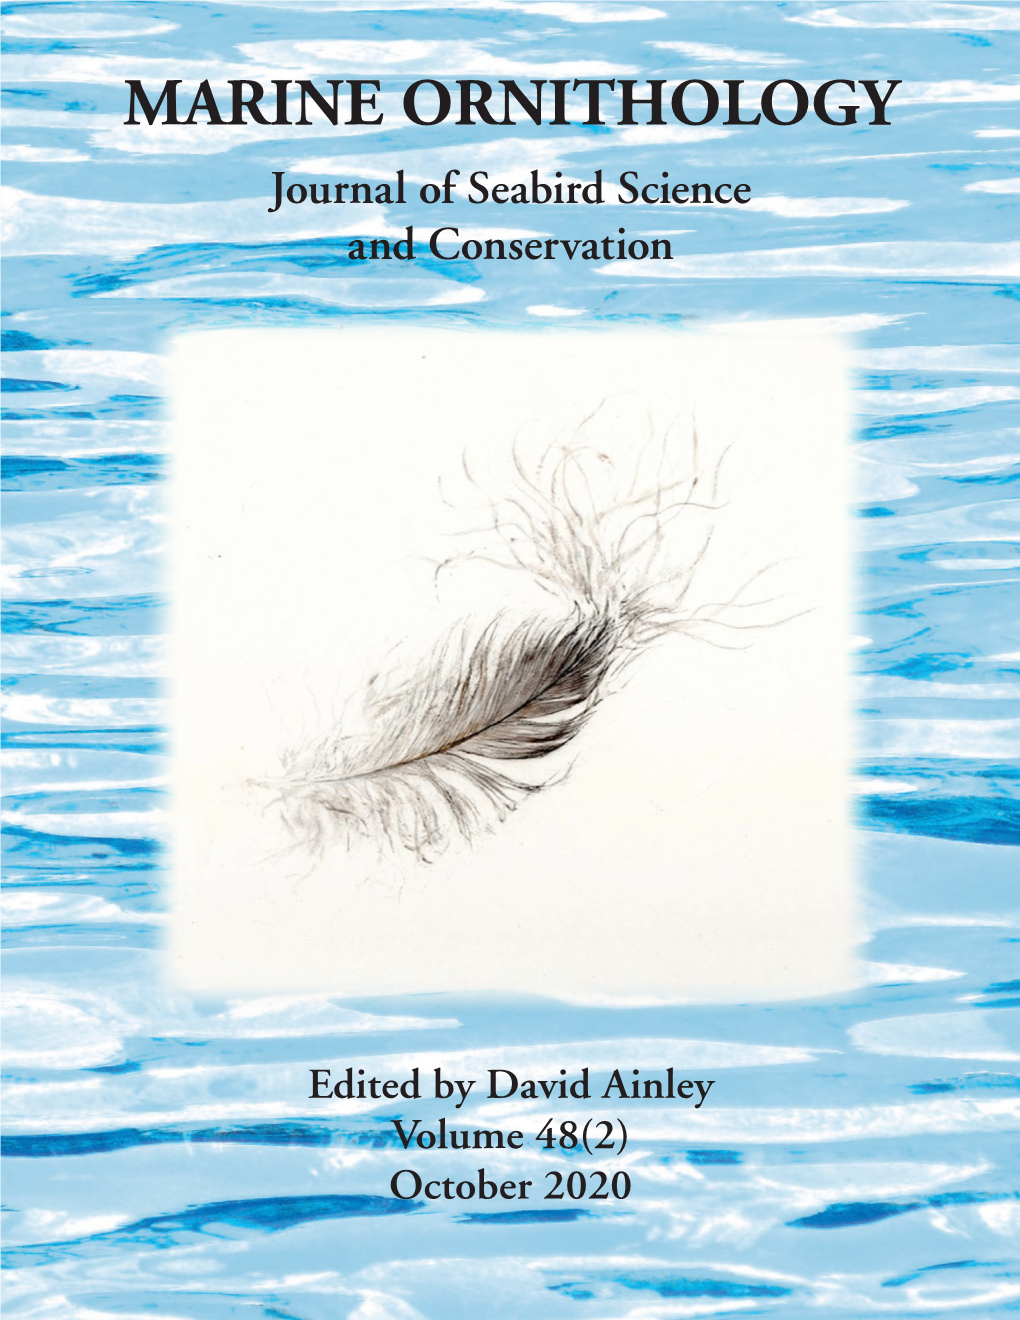 MARINE ORNITHOLOGY Journal of Seabird Science and Conservation